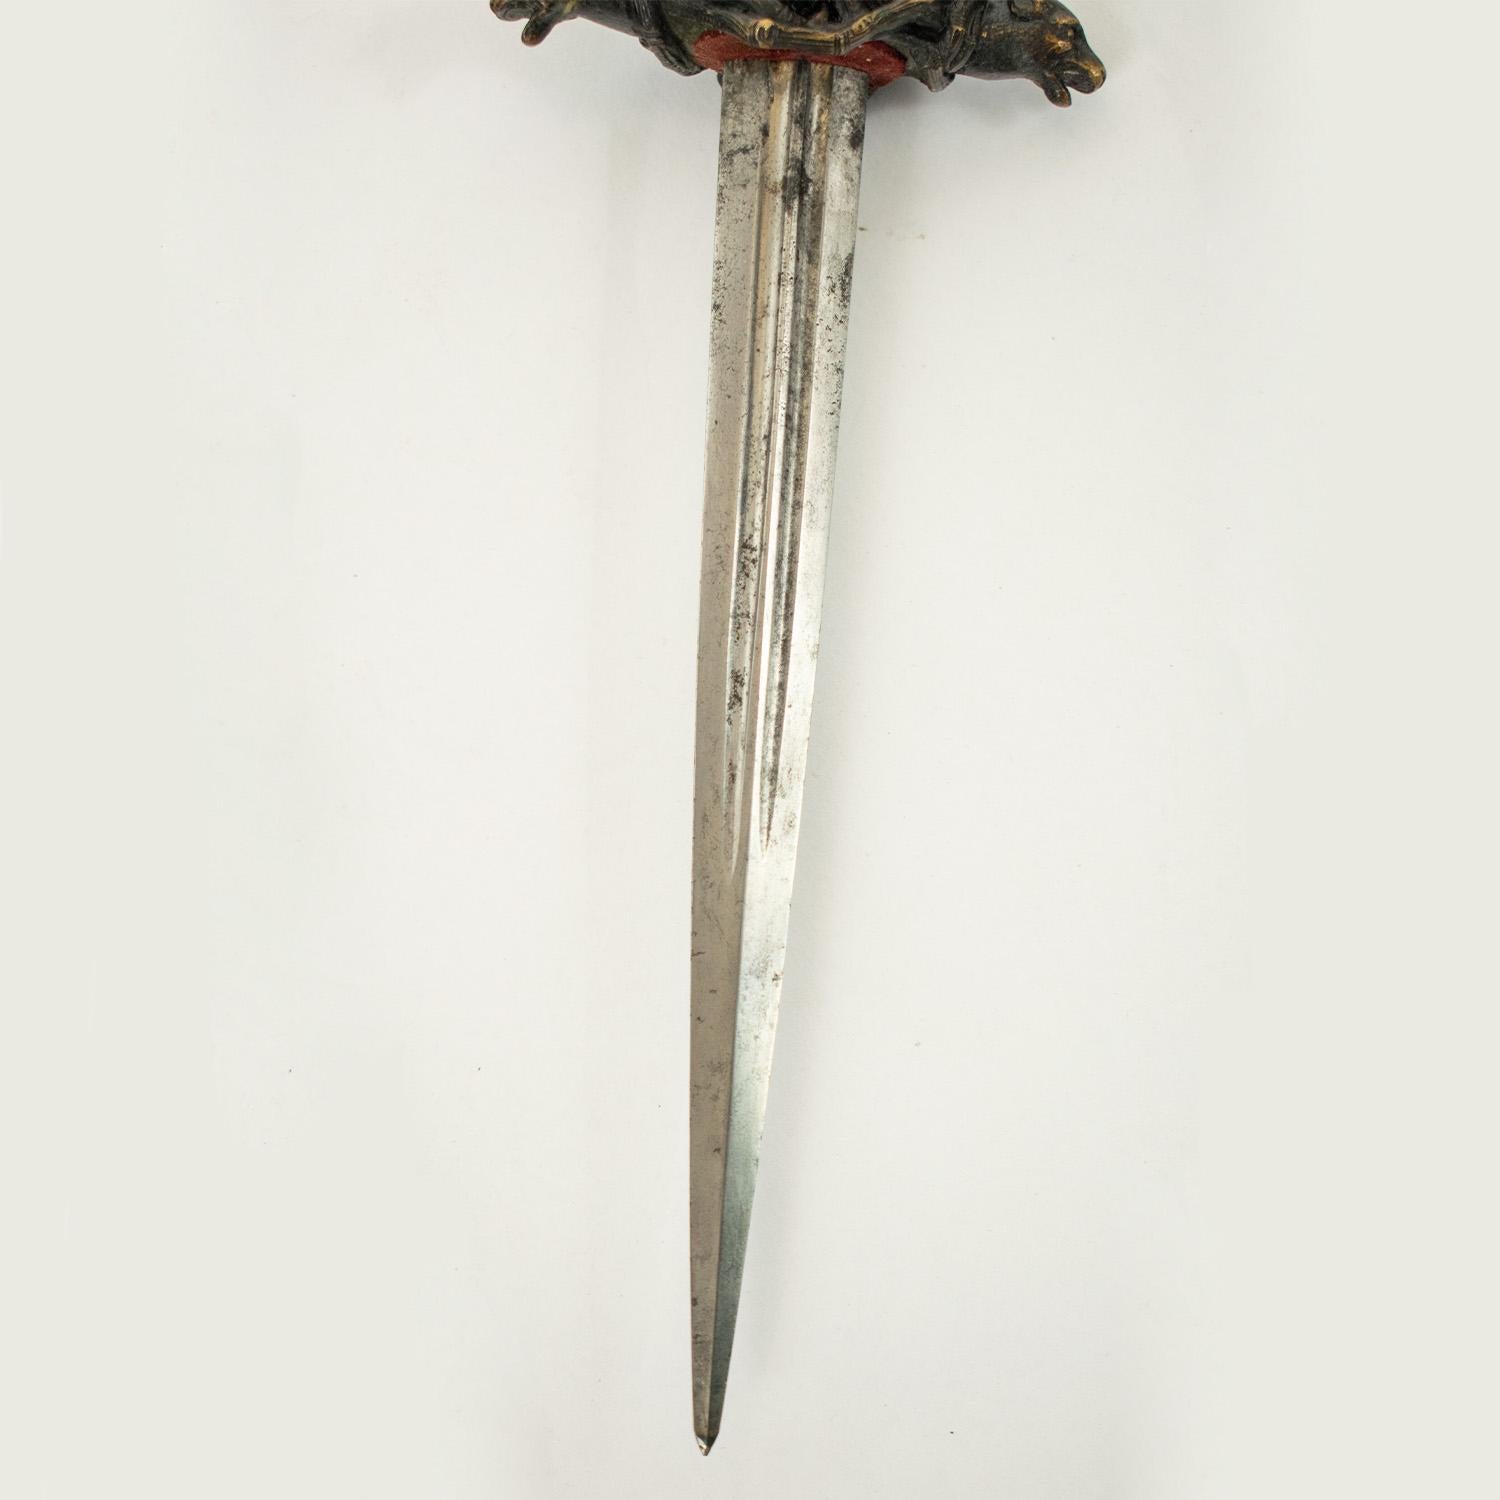 AMERICAN THEMED Romantic Dagger - early to mid 19th century - Spanish For Sale 1